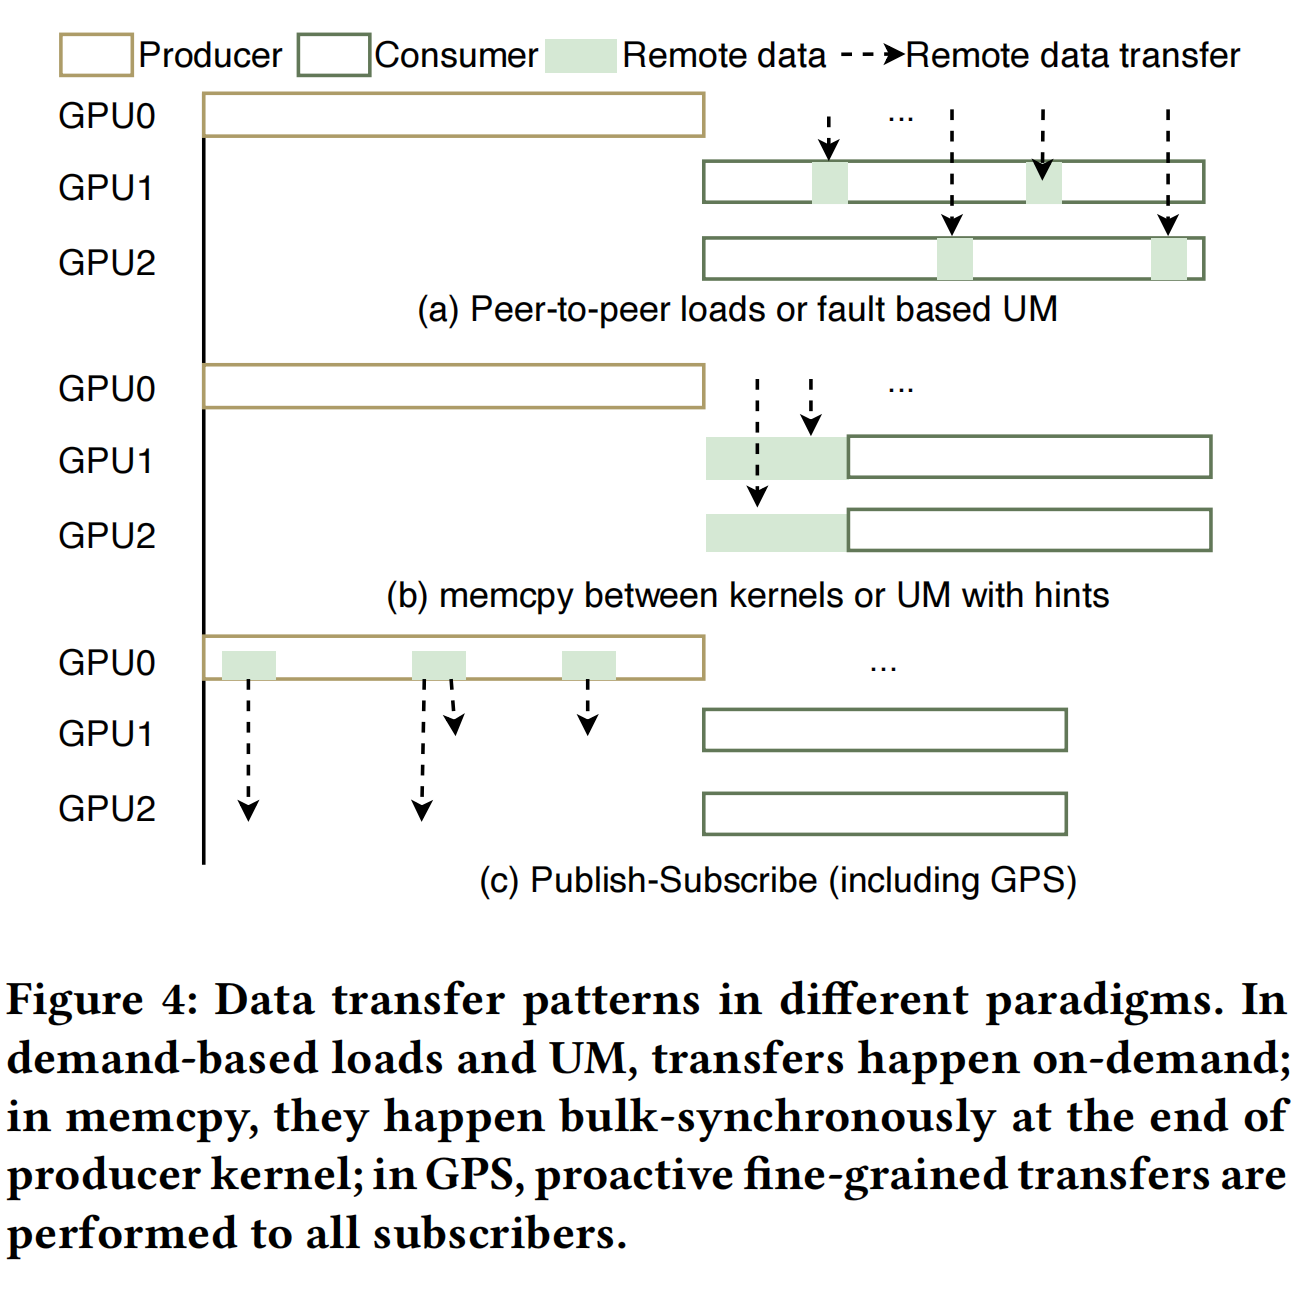 Figure 4: Data transfer patterns in different paradigms. In demand-based loads and UM, transfers happen on-demand; in memcpy, they happen bulk-synchronously at the end of producer kernel; in GPS, proactive fine-grained transfers are performed to all subscribers.